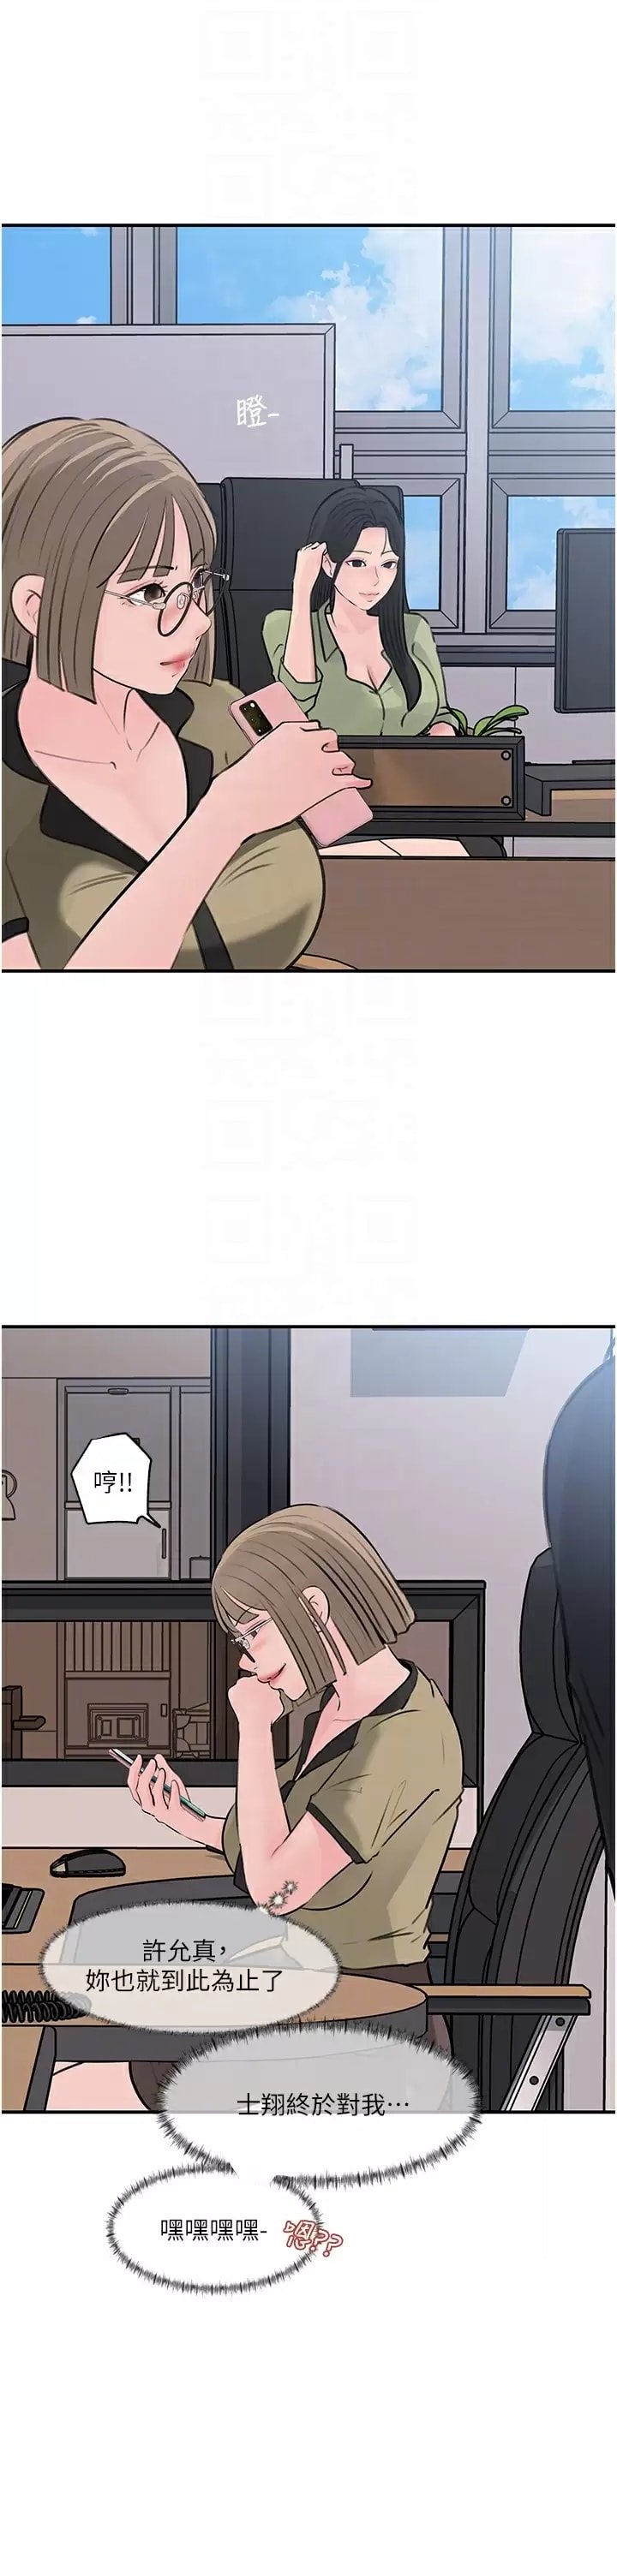 in-my-sister-in-law-raw-chap-34-7